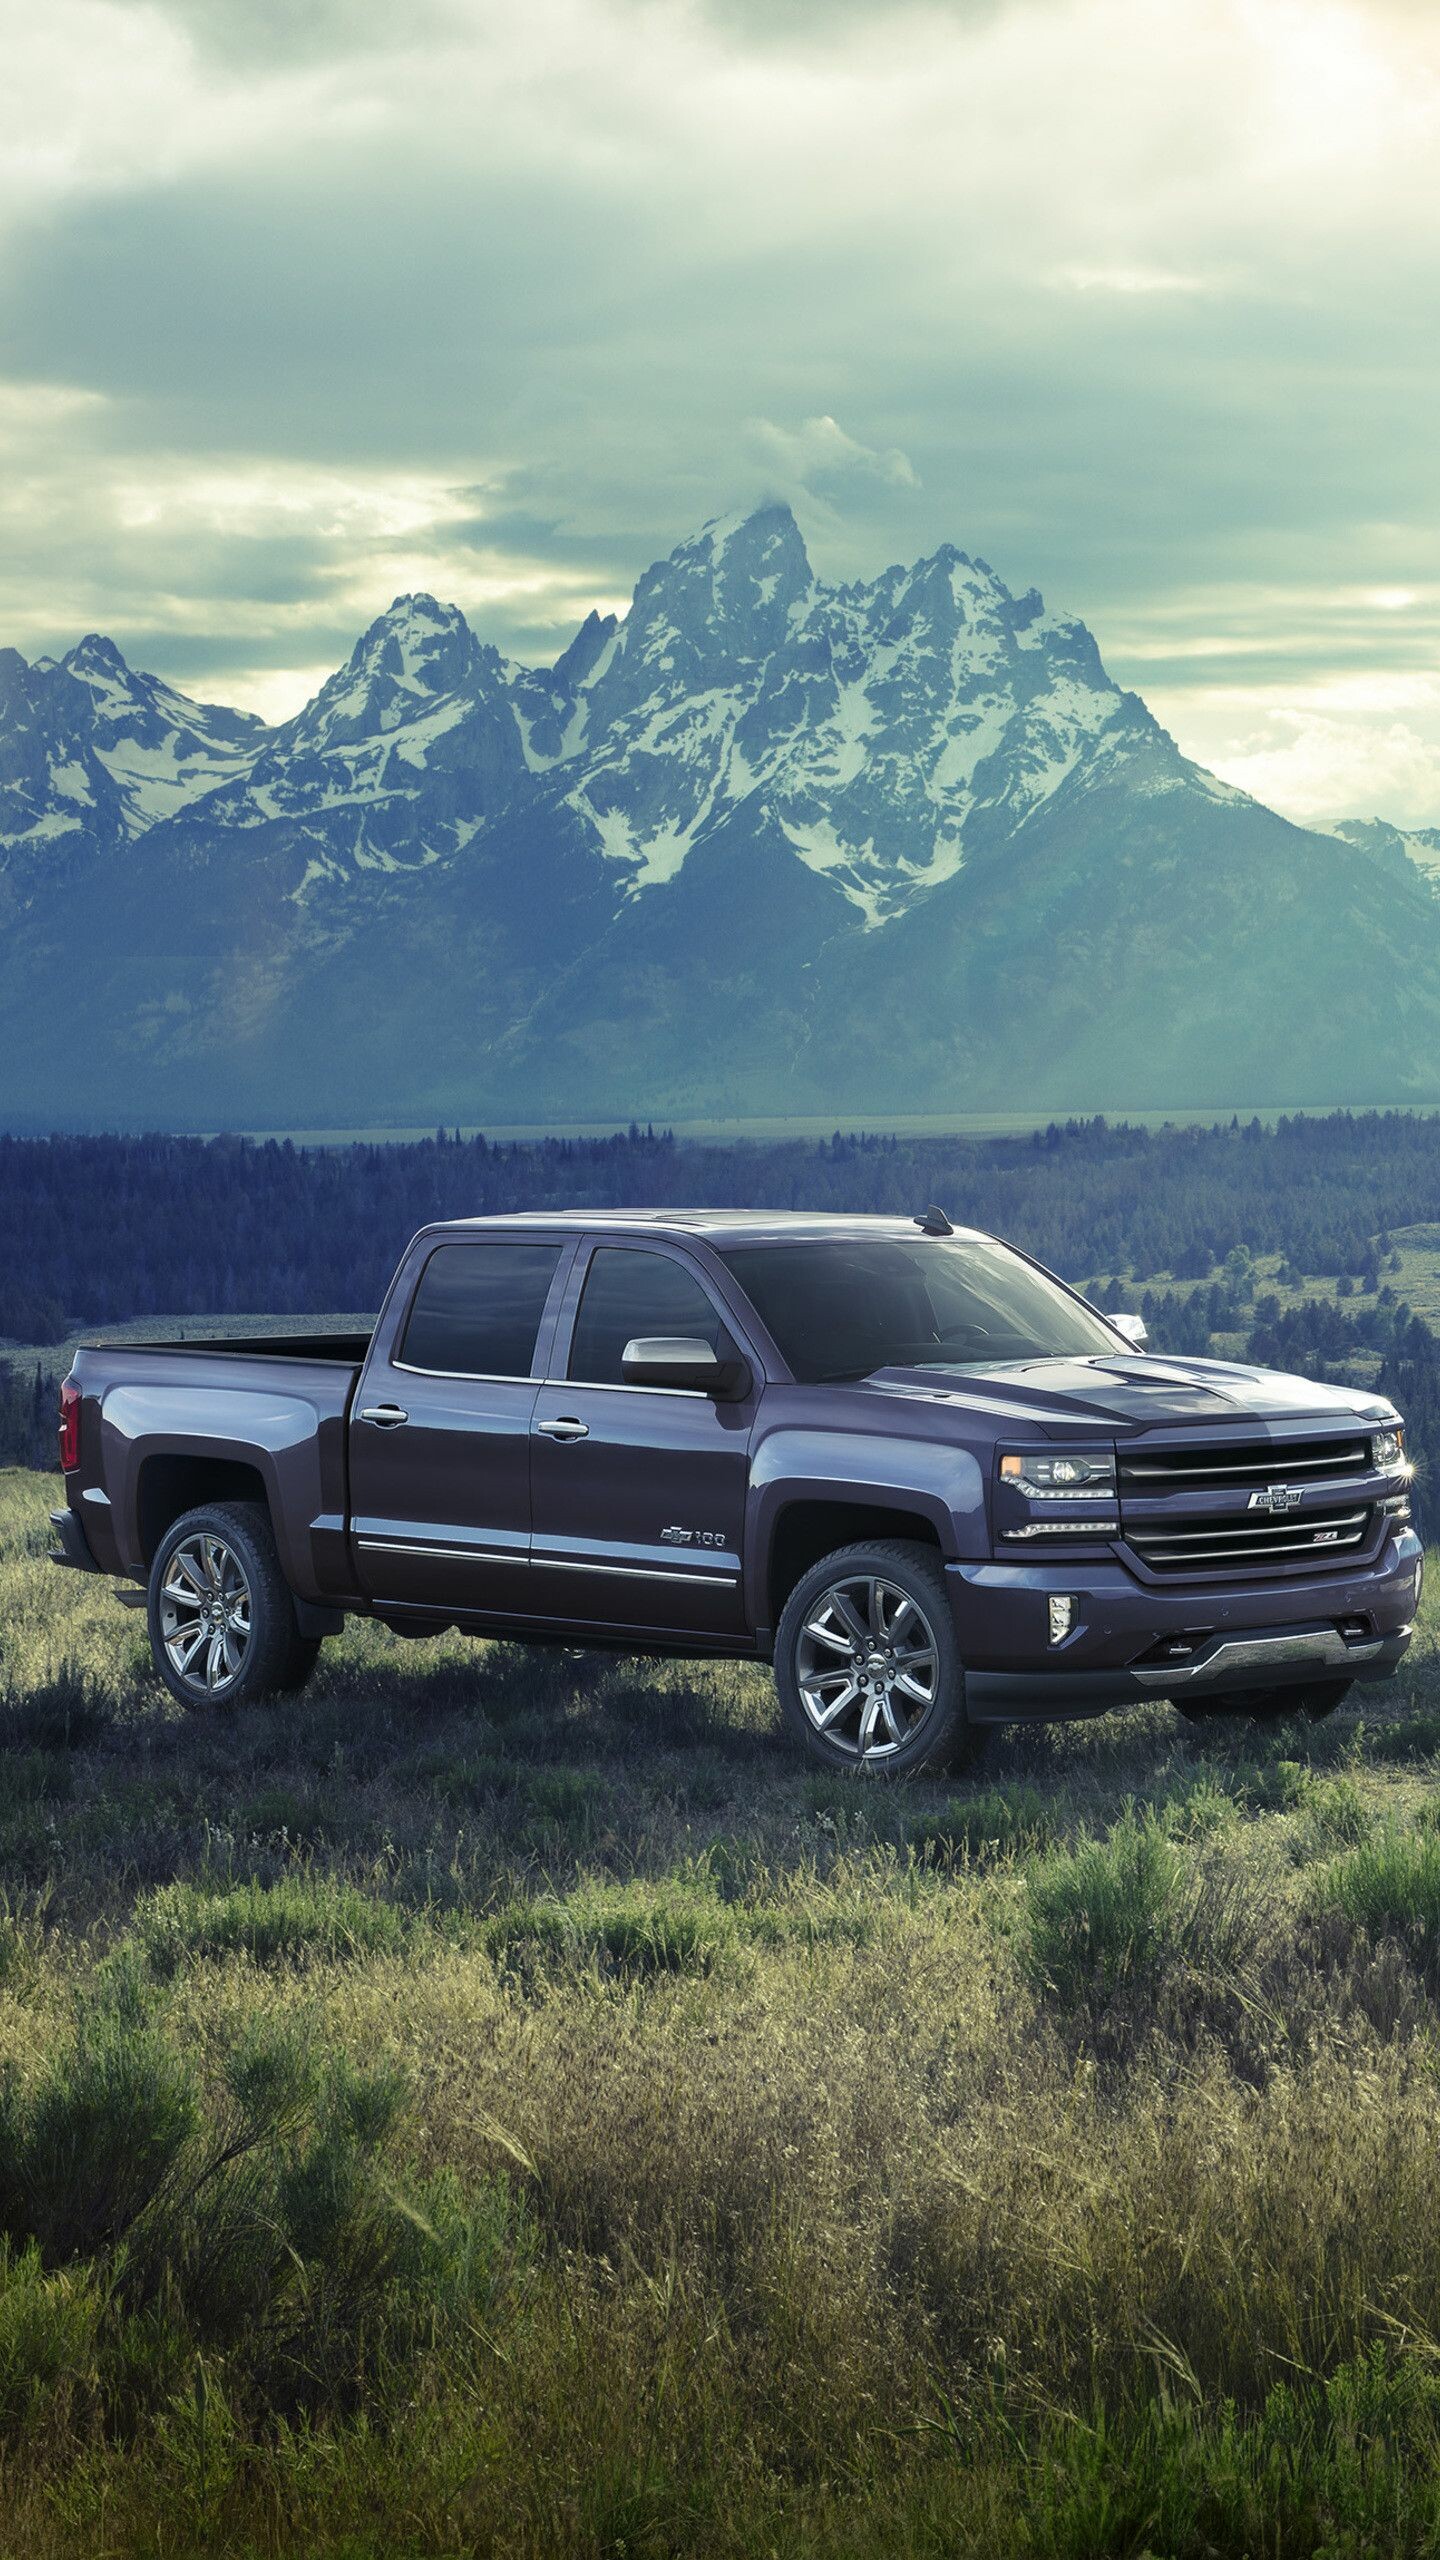 Chevrolet Silverado: Full-size truck, First introduced as a light-duty pickup truck in 1999. 1440x2560 HD Background.